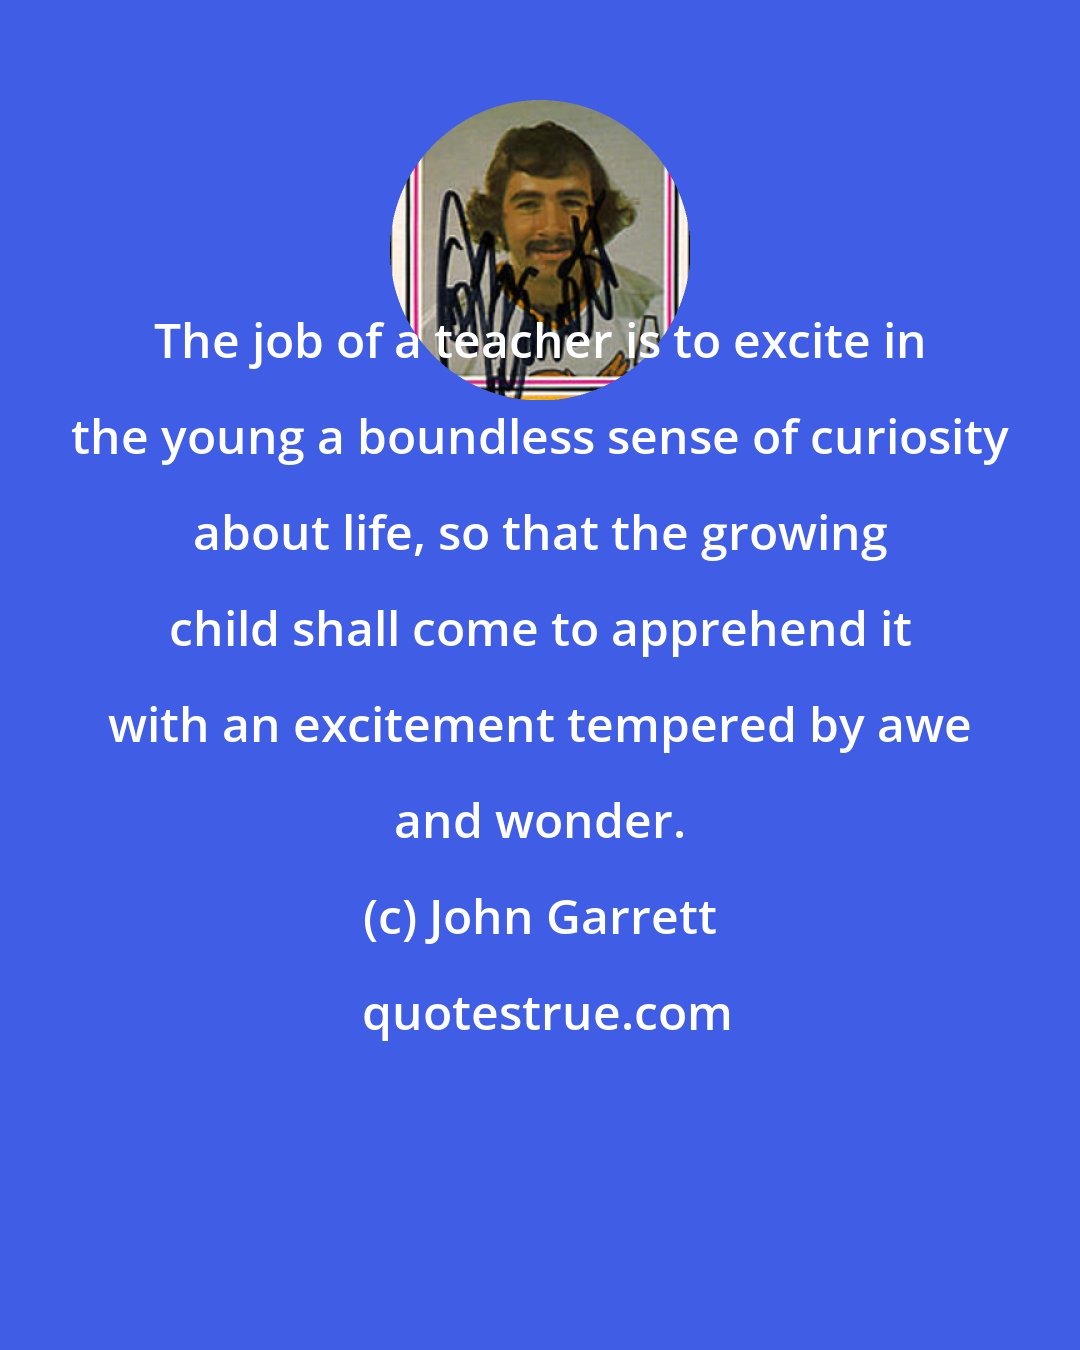 John Garrett: The job of a teacher is to excite in the young a boundless sense of curiosity about life, so that the growing child shall come to apprehend it with an excitement tempered by awe and wonder.